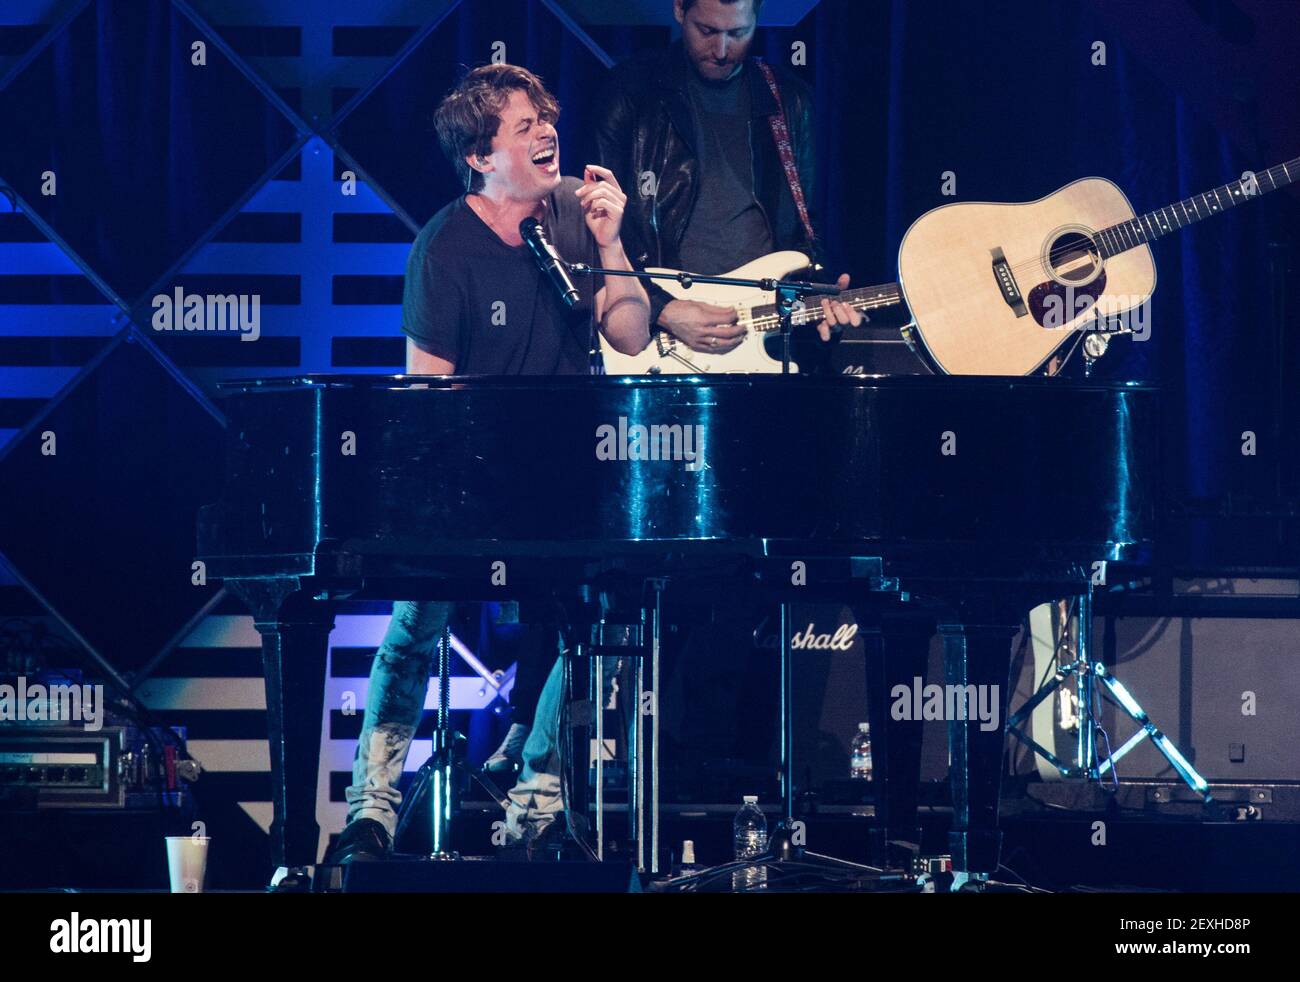 Recording Artist Charlie Puth performs during the WILD 94.9 iHeartRadio Jingle Ball at SAP Center on December 1, 2016 in San Jose, California.(Photo by Chris Tuite/ImageSPACE) *** Please Use Credit from Credit Field *** Stock Photo